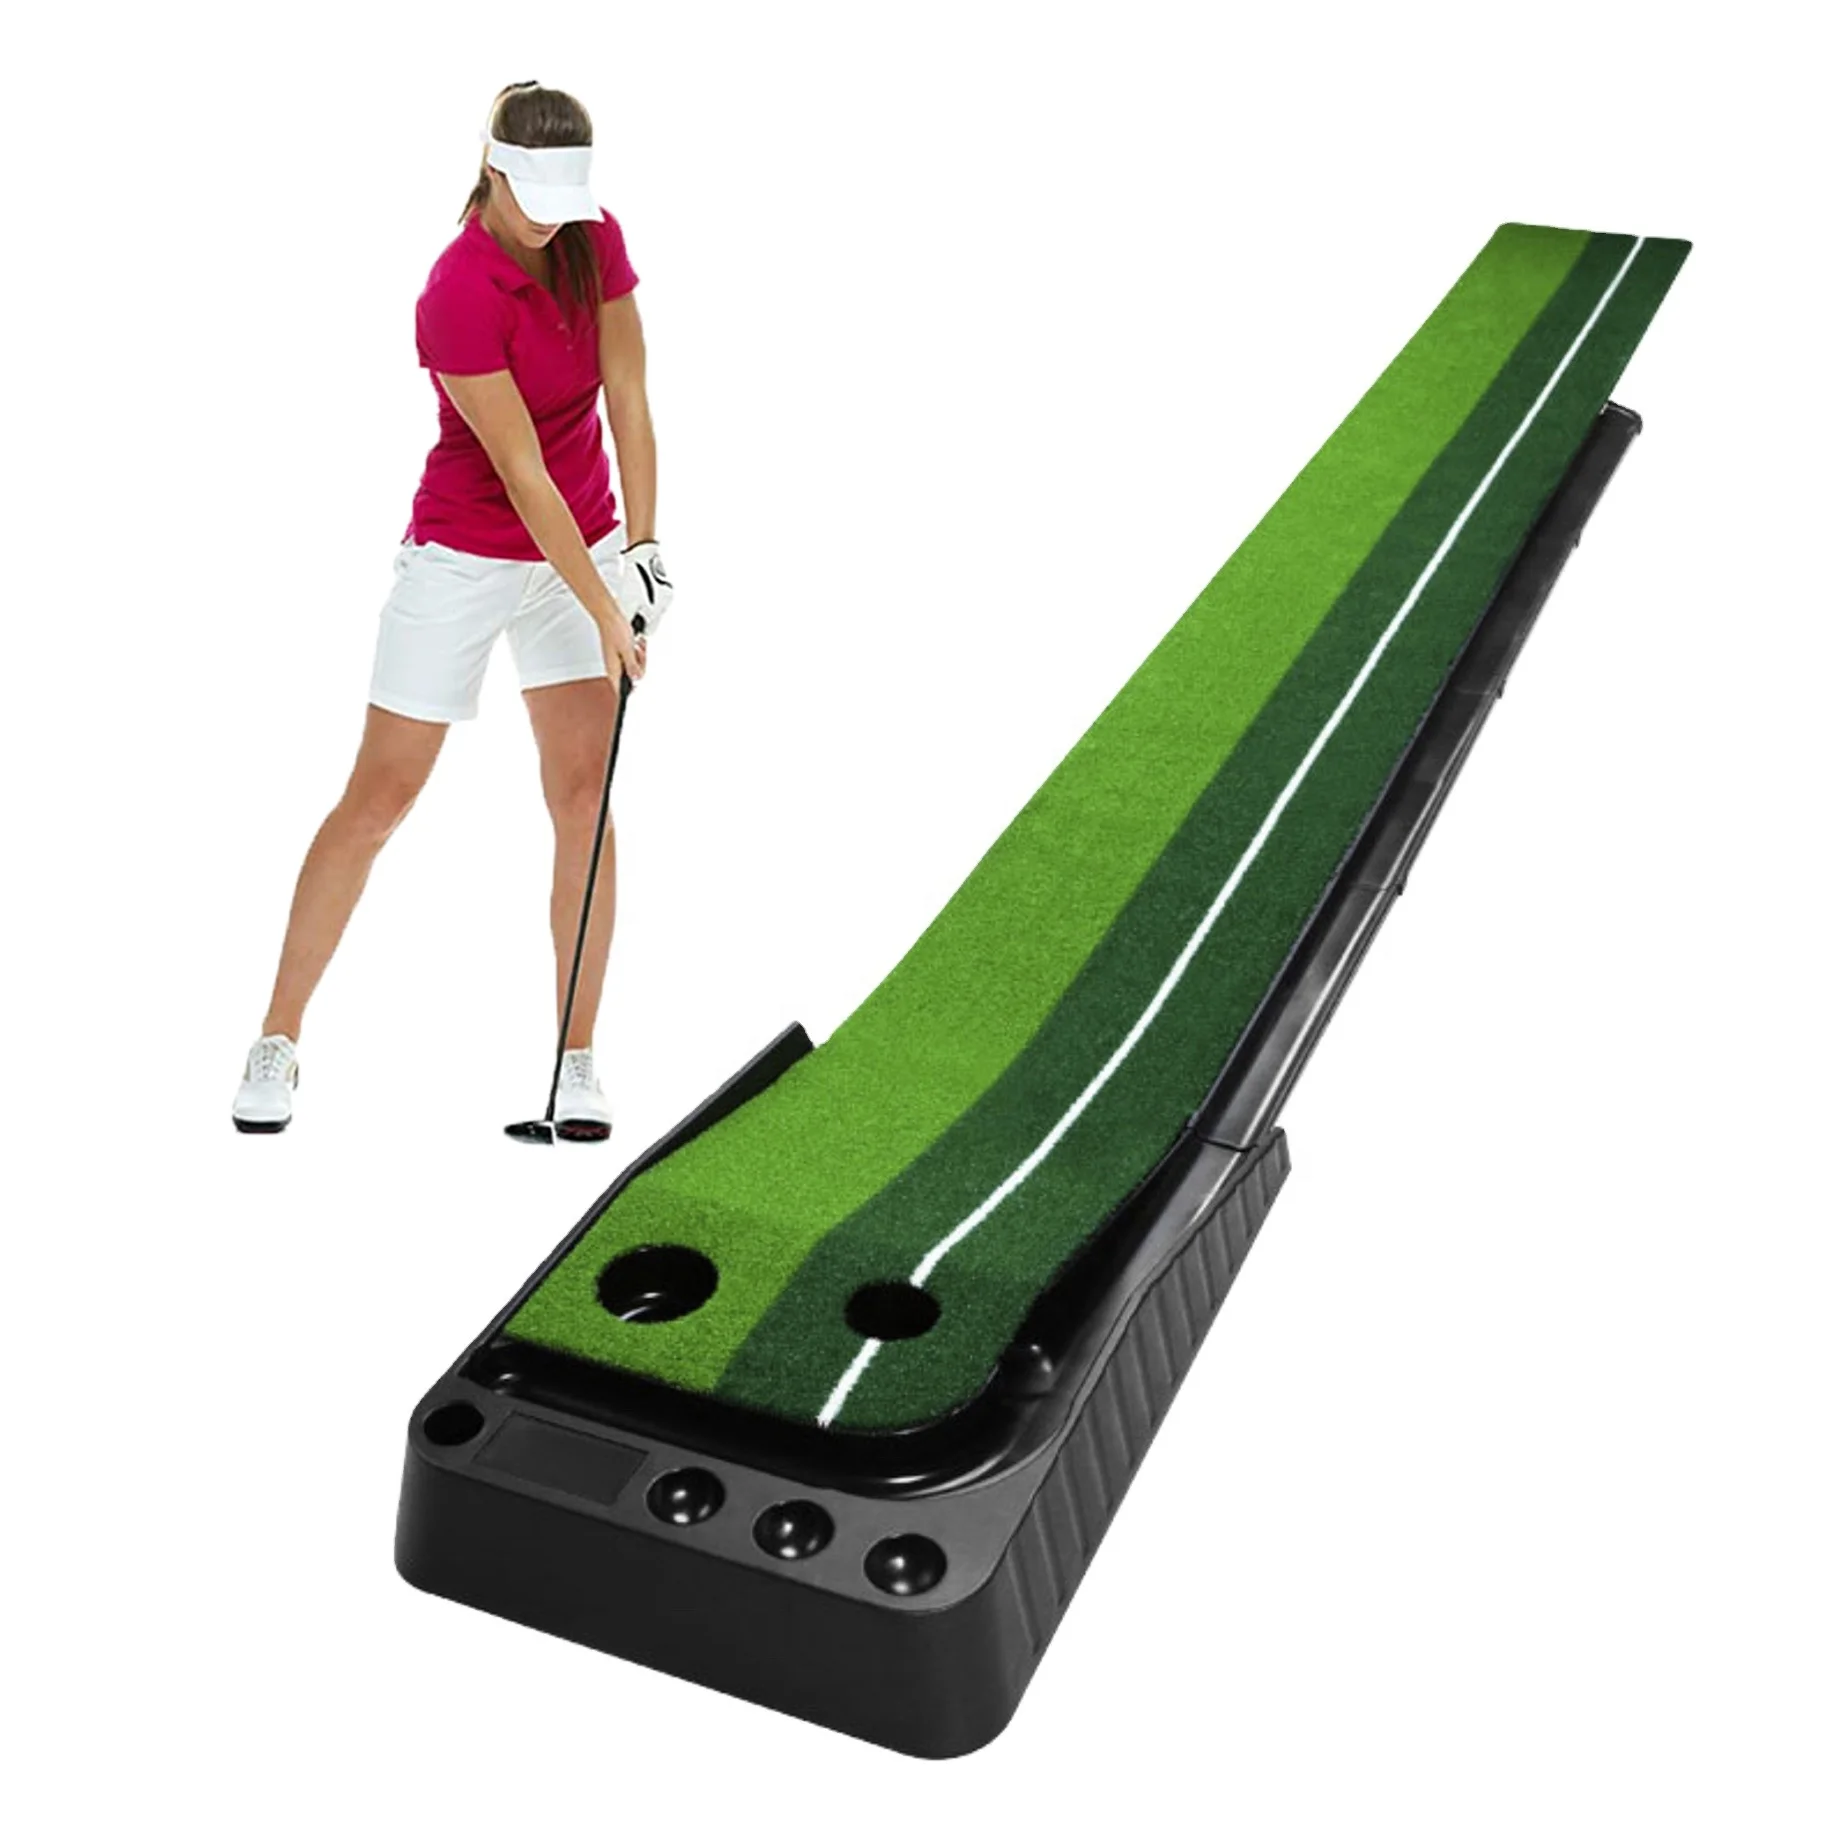 

Golf Putting Green Patice Mat - Portable Mat with Auto Ball Return Function - Mini Golf Practice Training Aid, Game and Gift